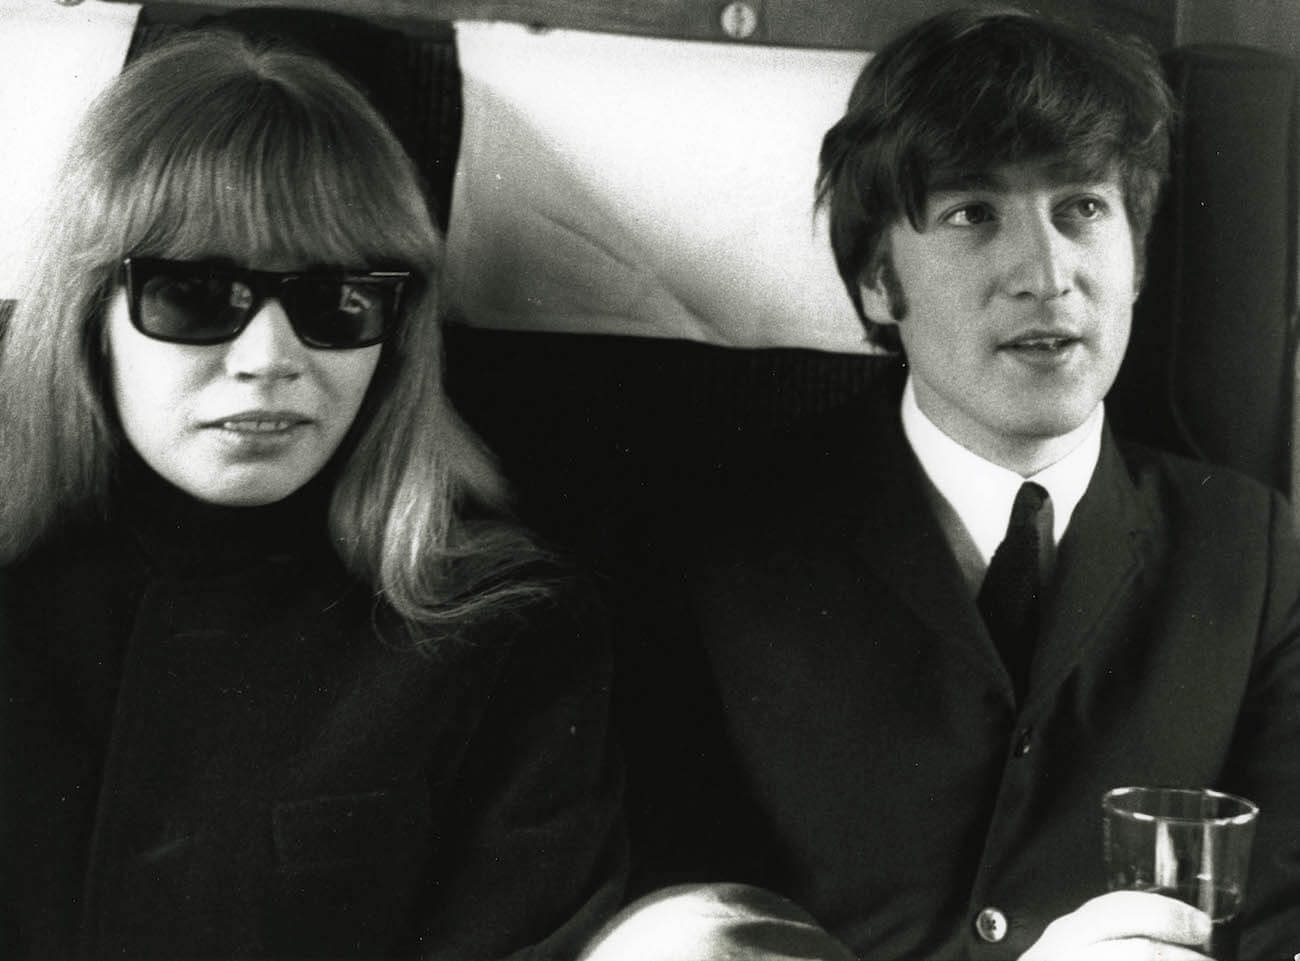 The Beatles with their friend Astrid Kirchherr on the set of 'A Hard Day's Night' in 1964.